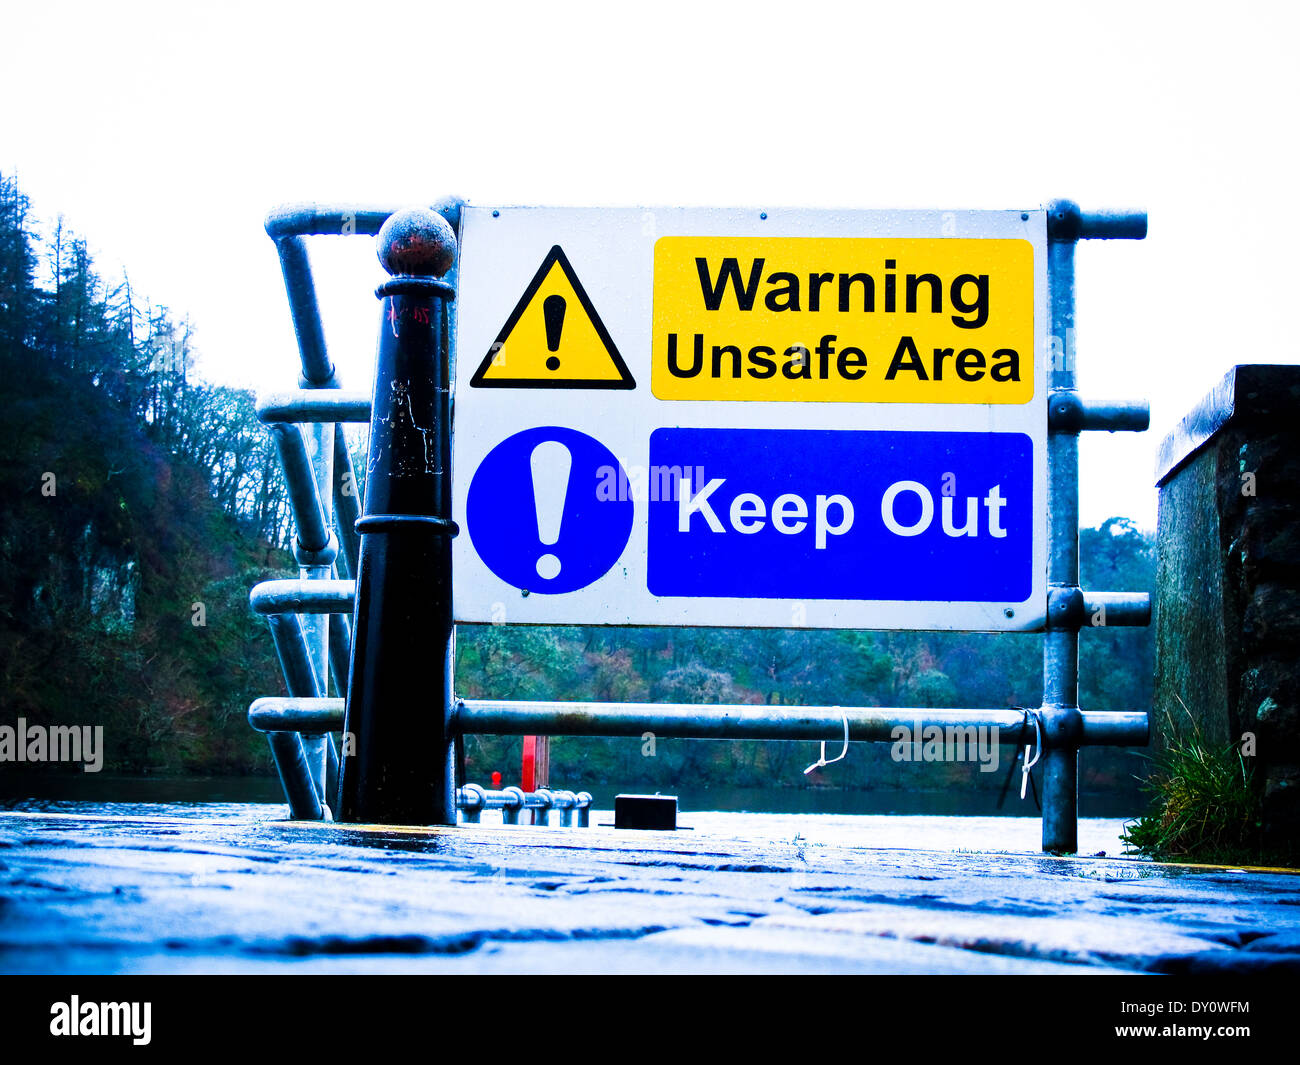 Warning unsafe area Keep Out caution sign Stock Photo